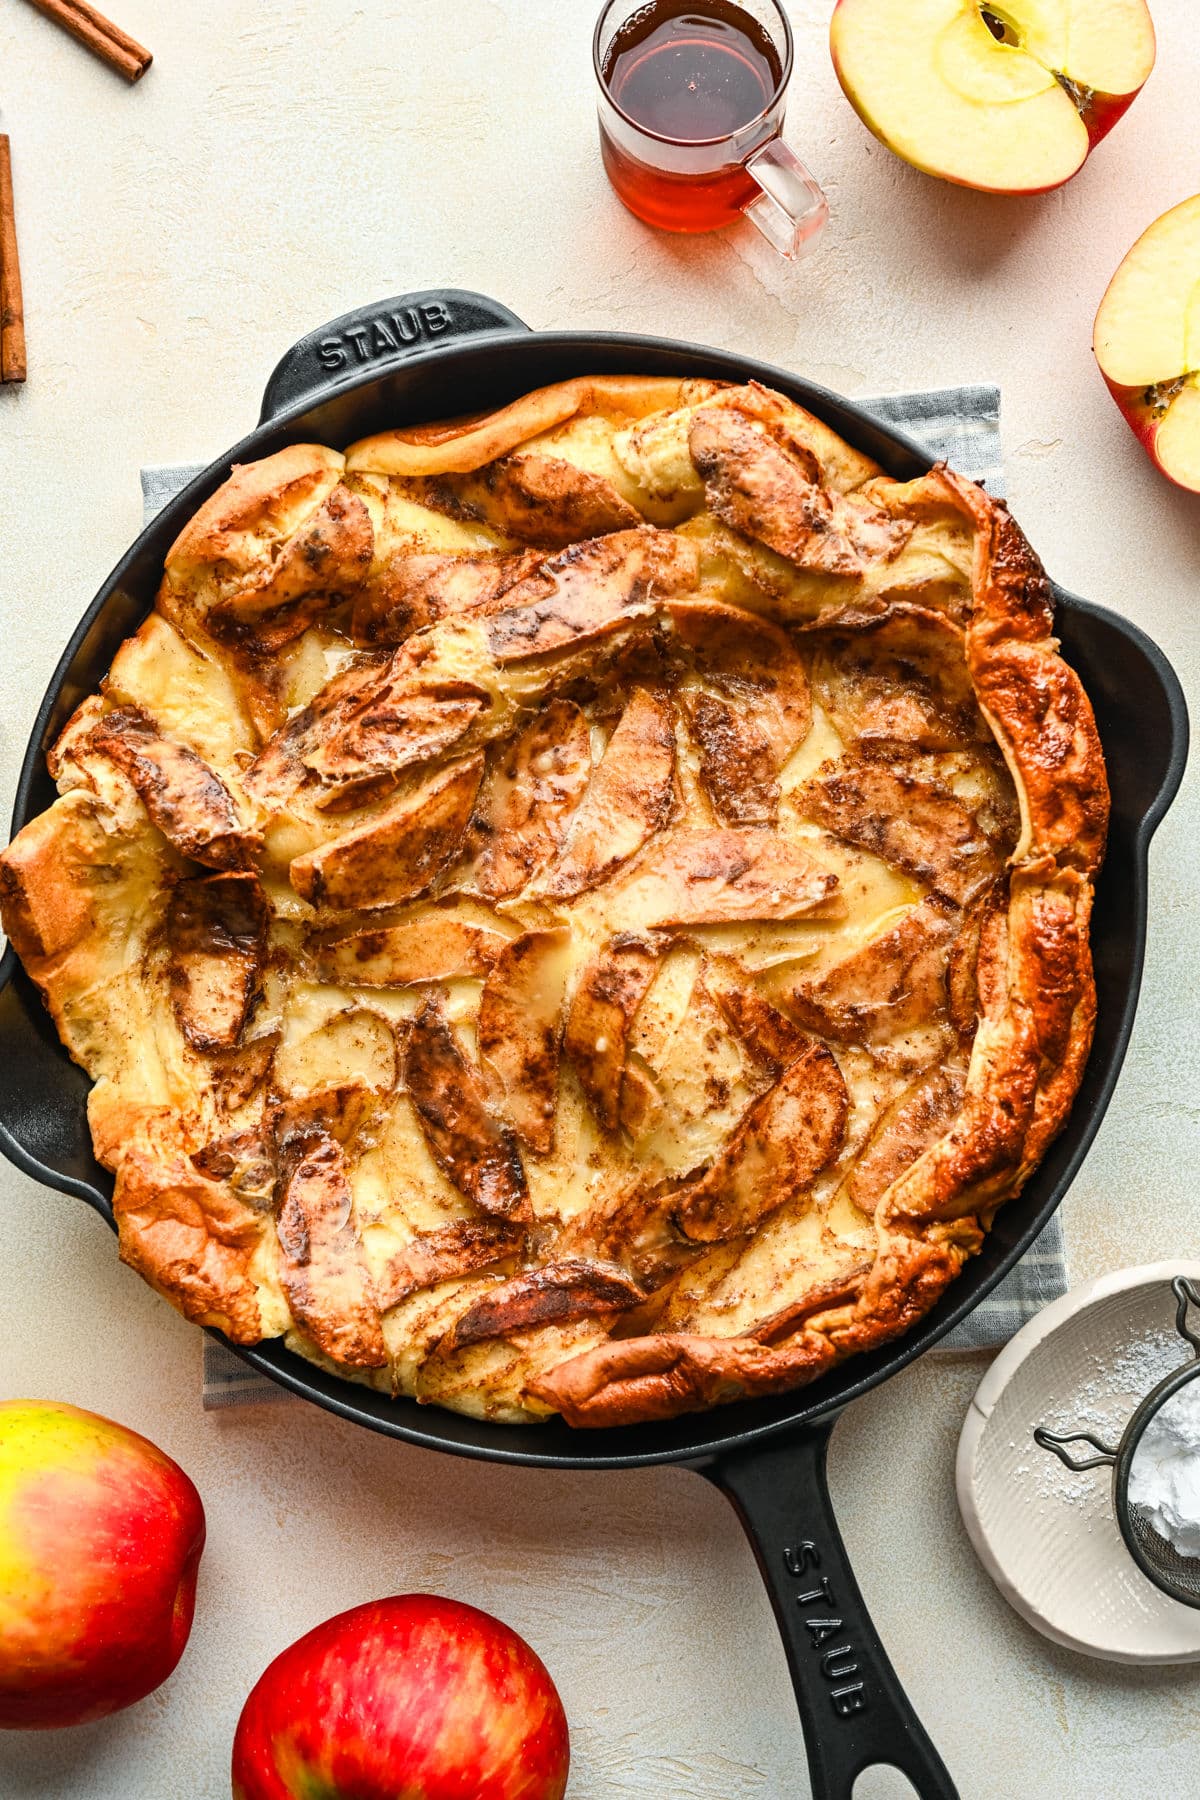 Baked German apple pancake in a cast iron skillet.